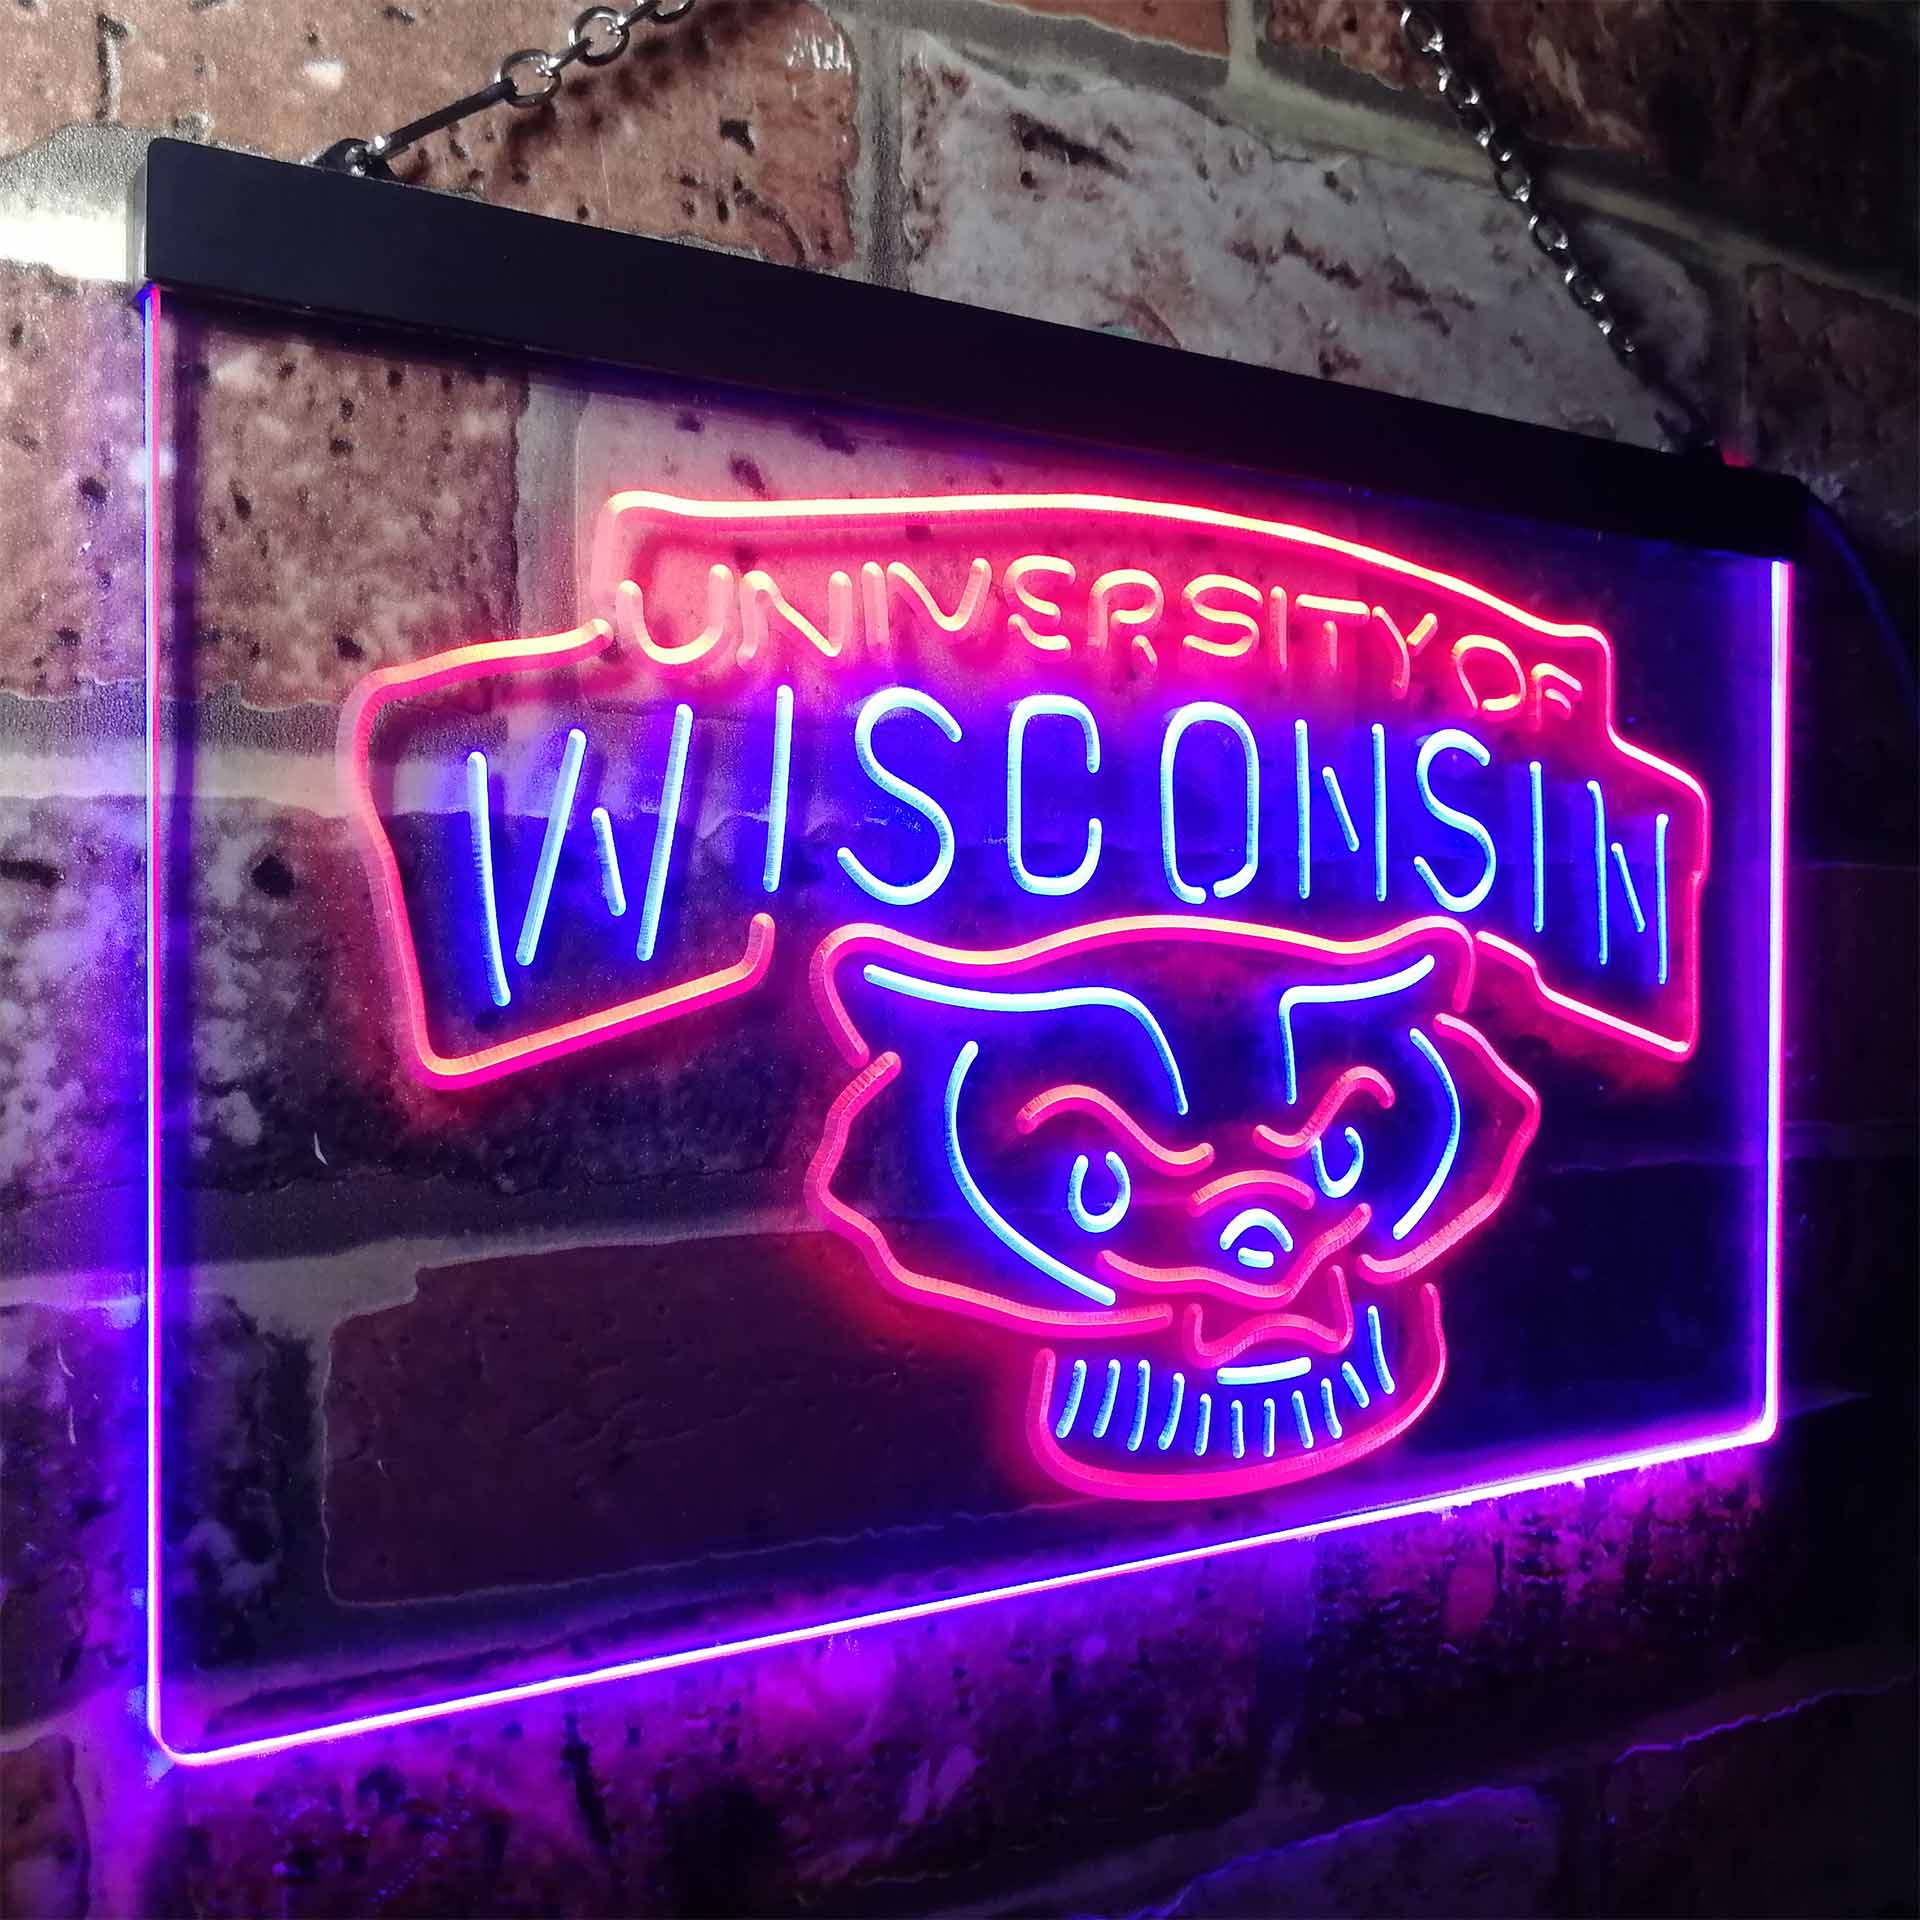 Wisconsins Badgers Club LED Neon Sign